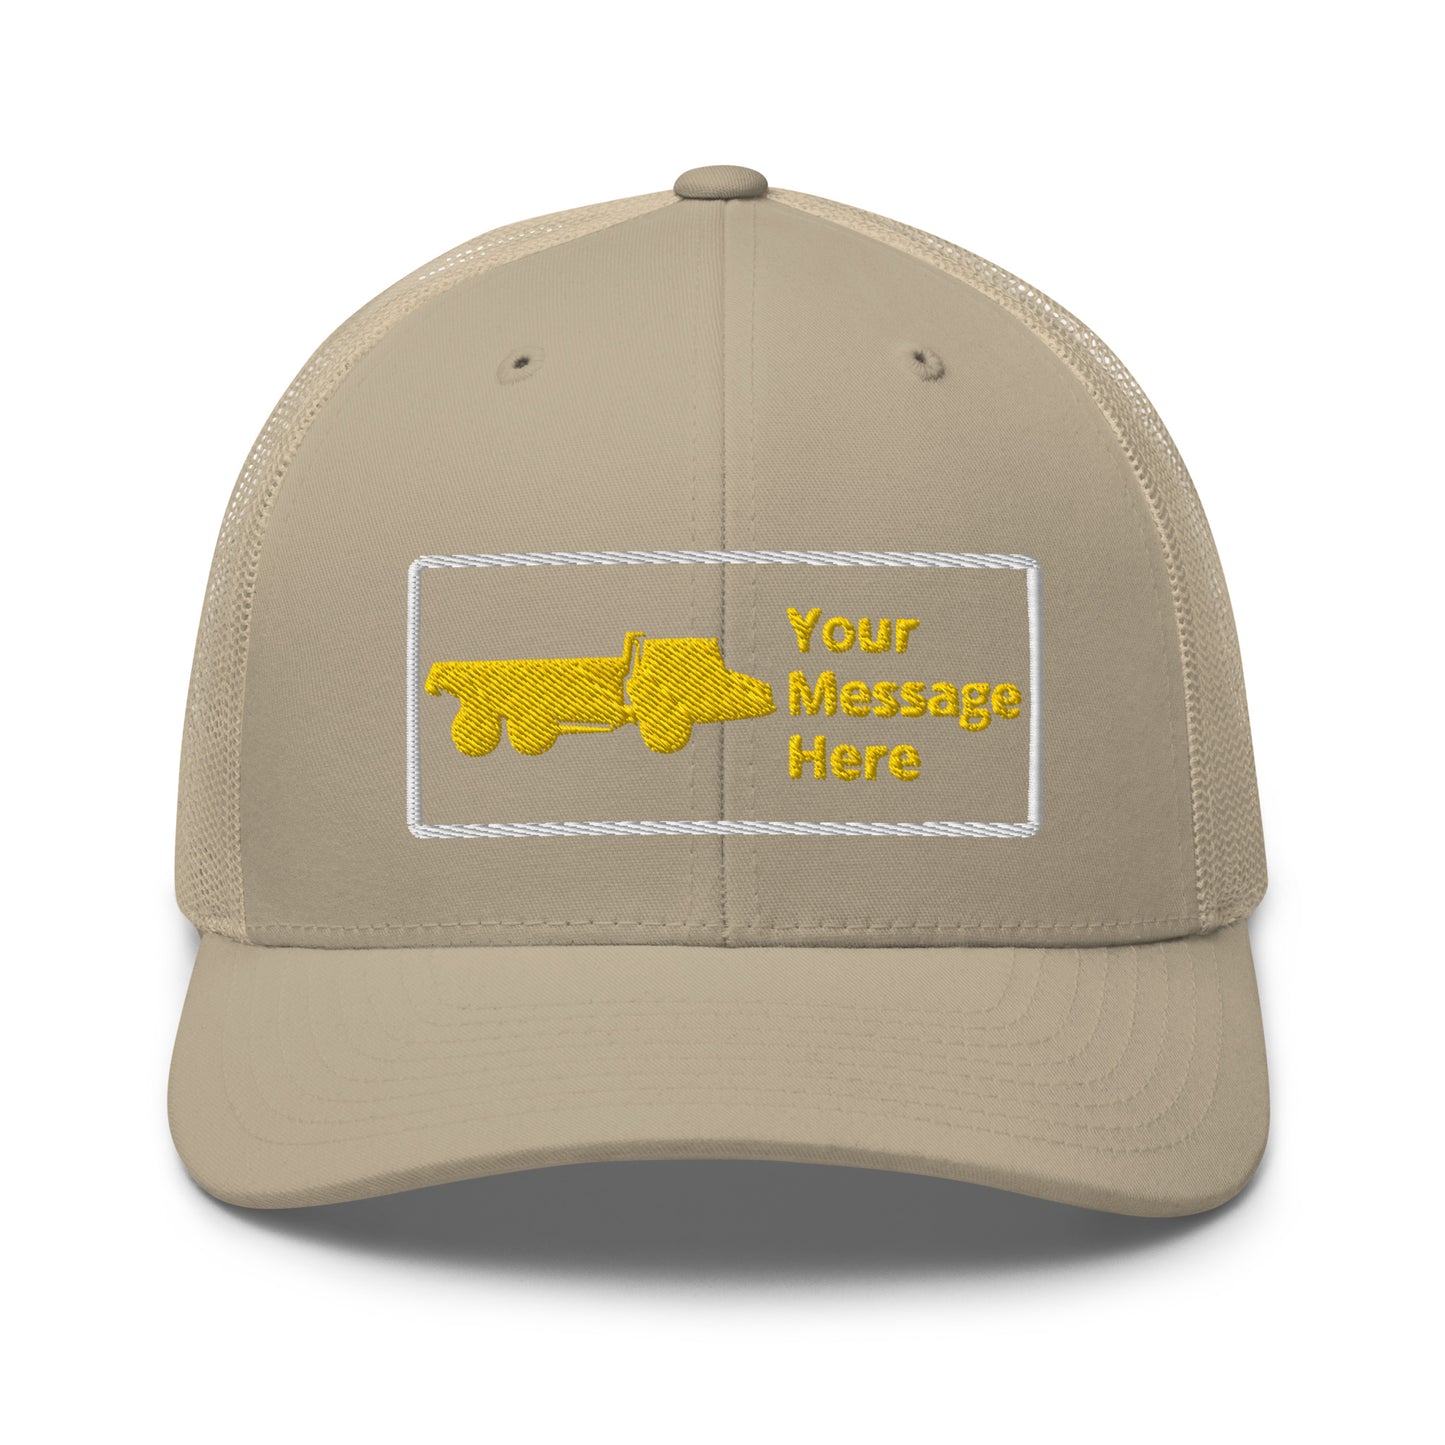 Articulated Hauler Cap. Heavy Machinery Trucker Hat for Driver Construction C026